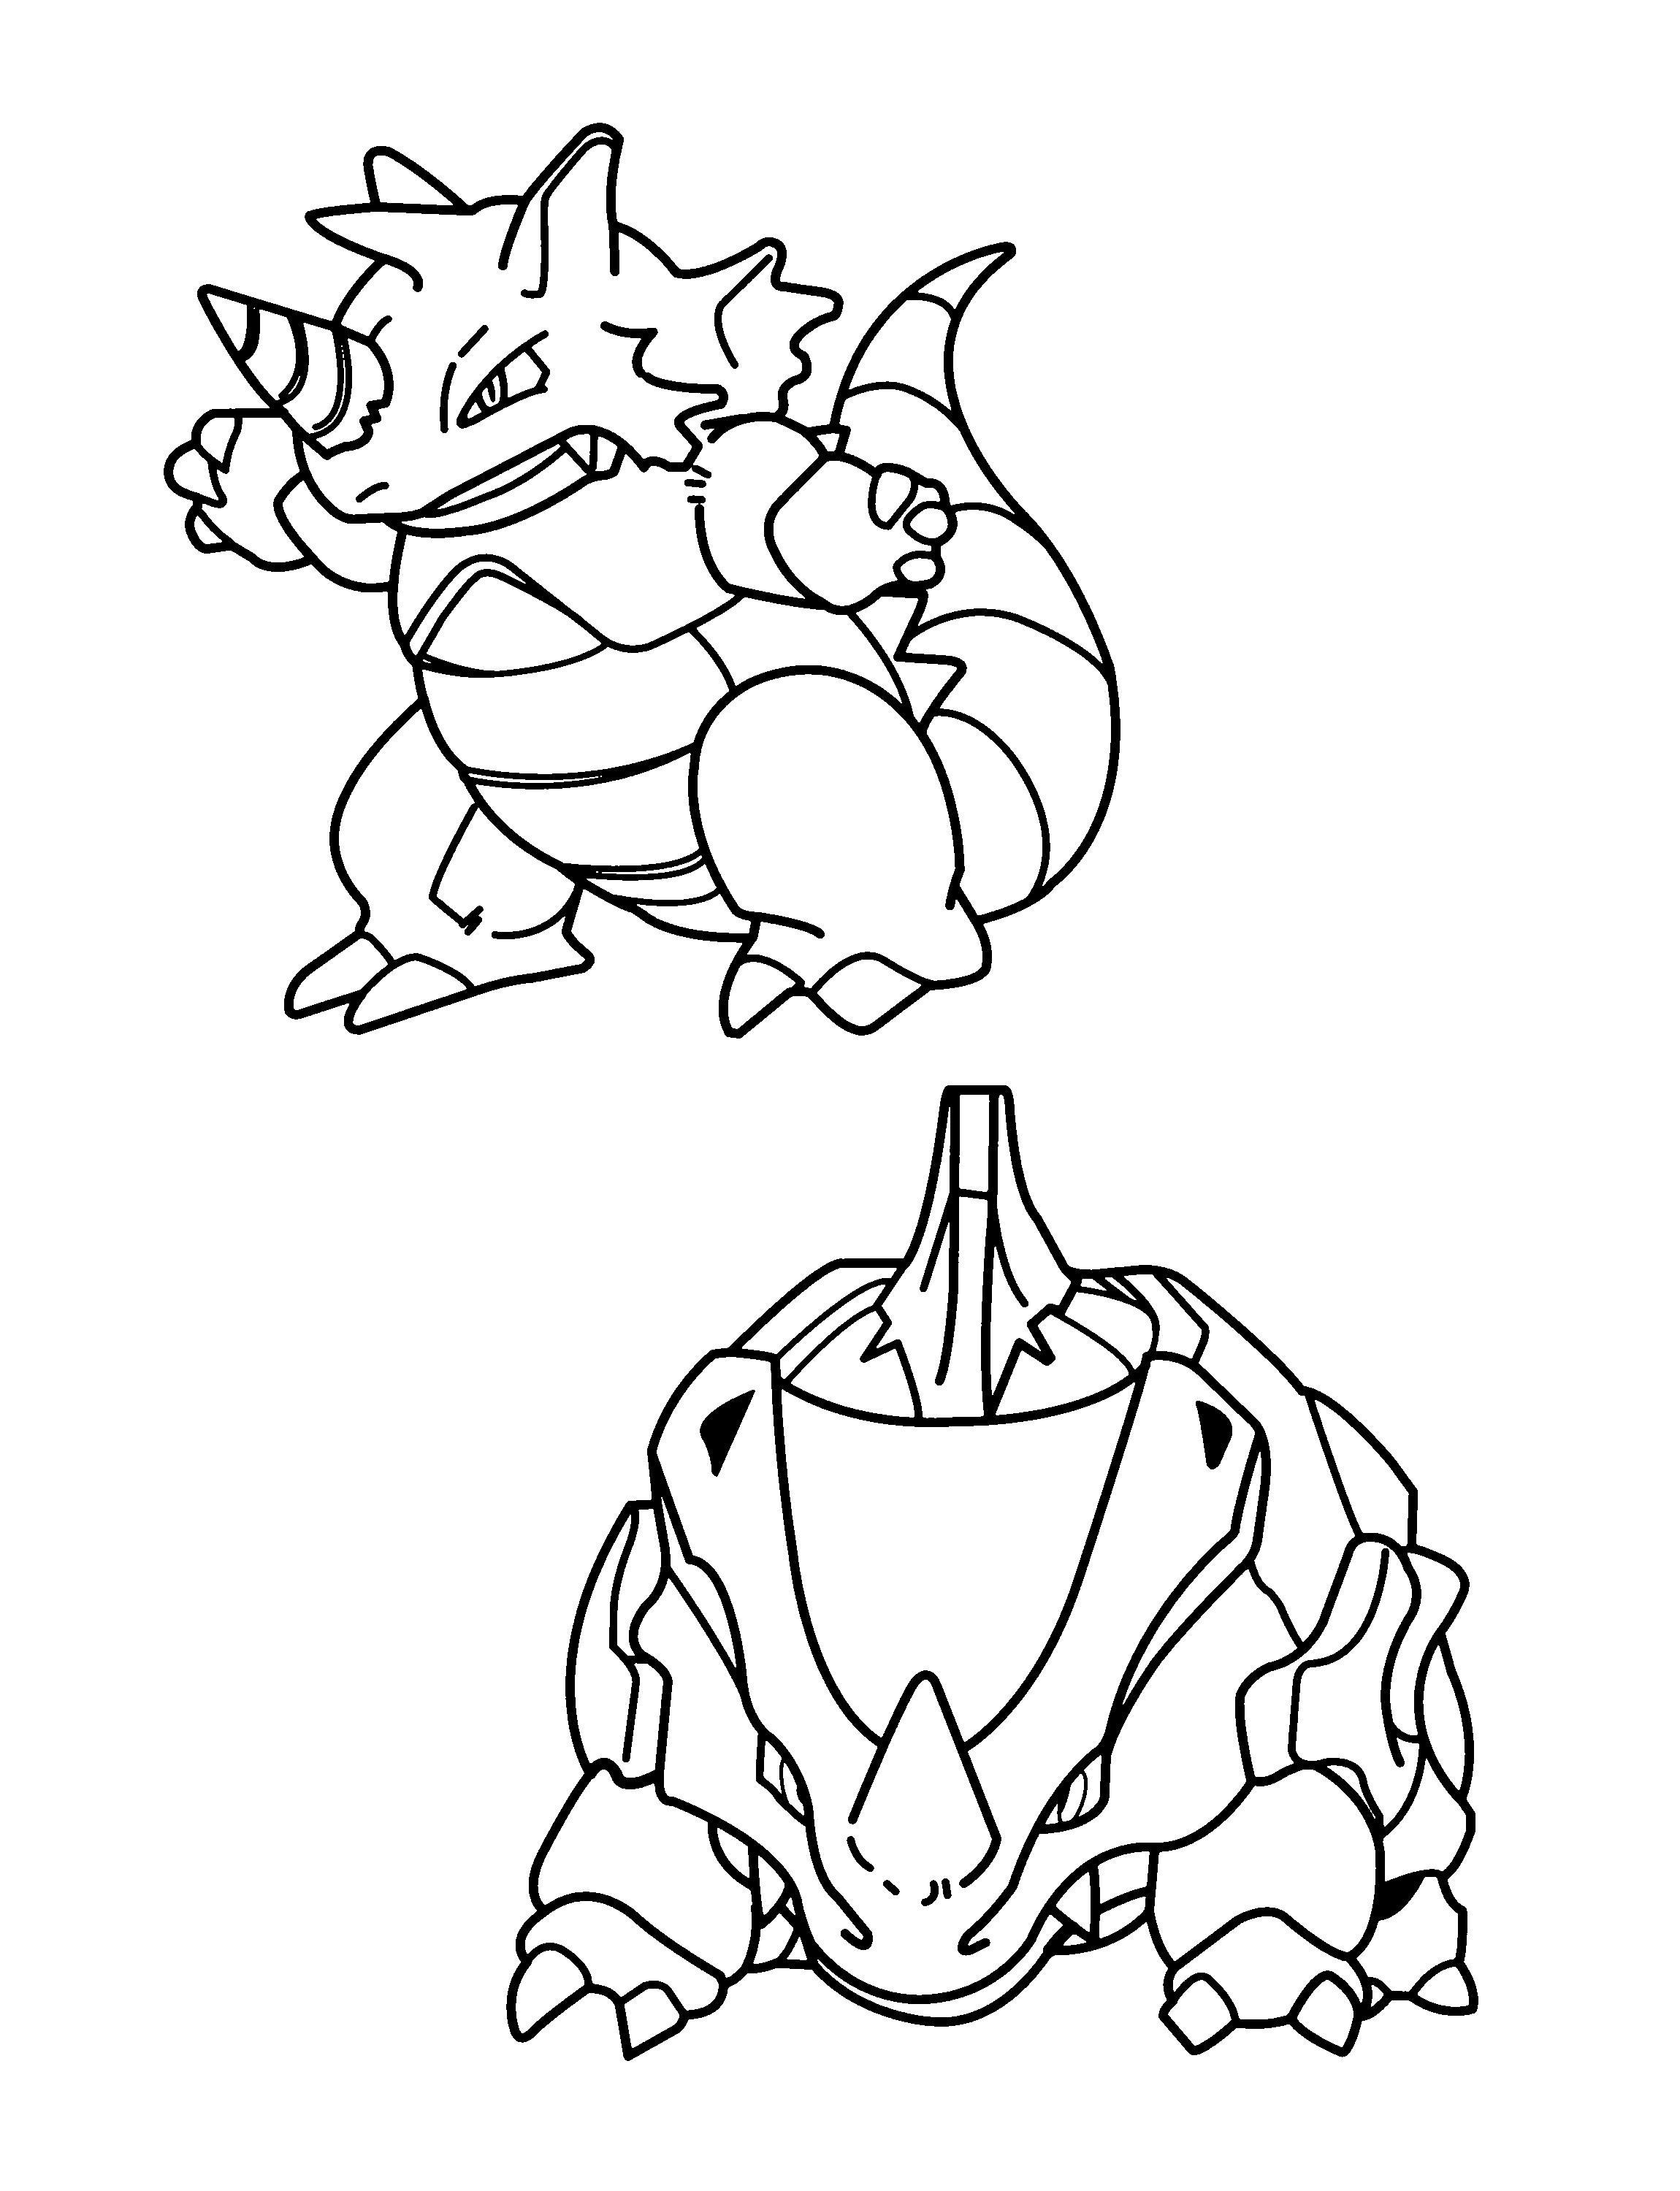 Coloring Page - Pokemon coloring pages 511